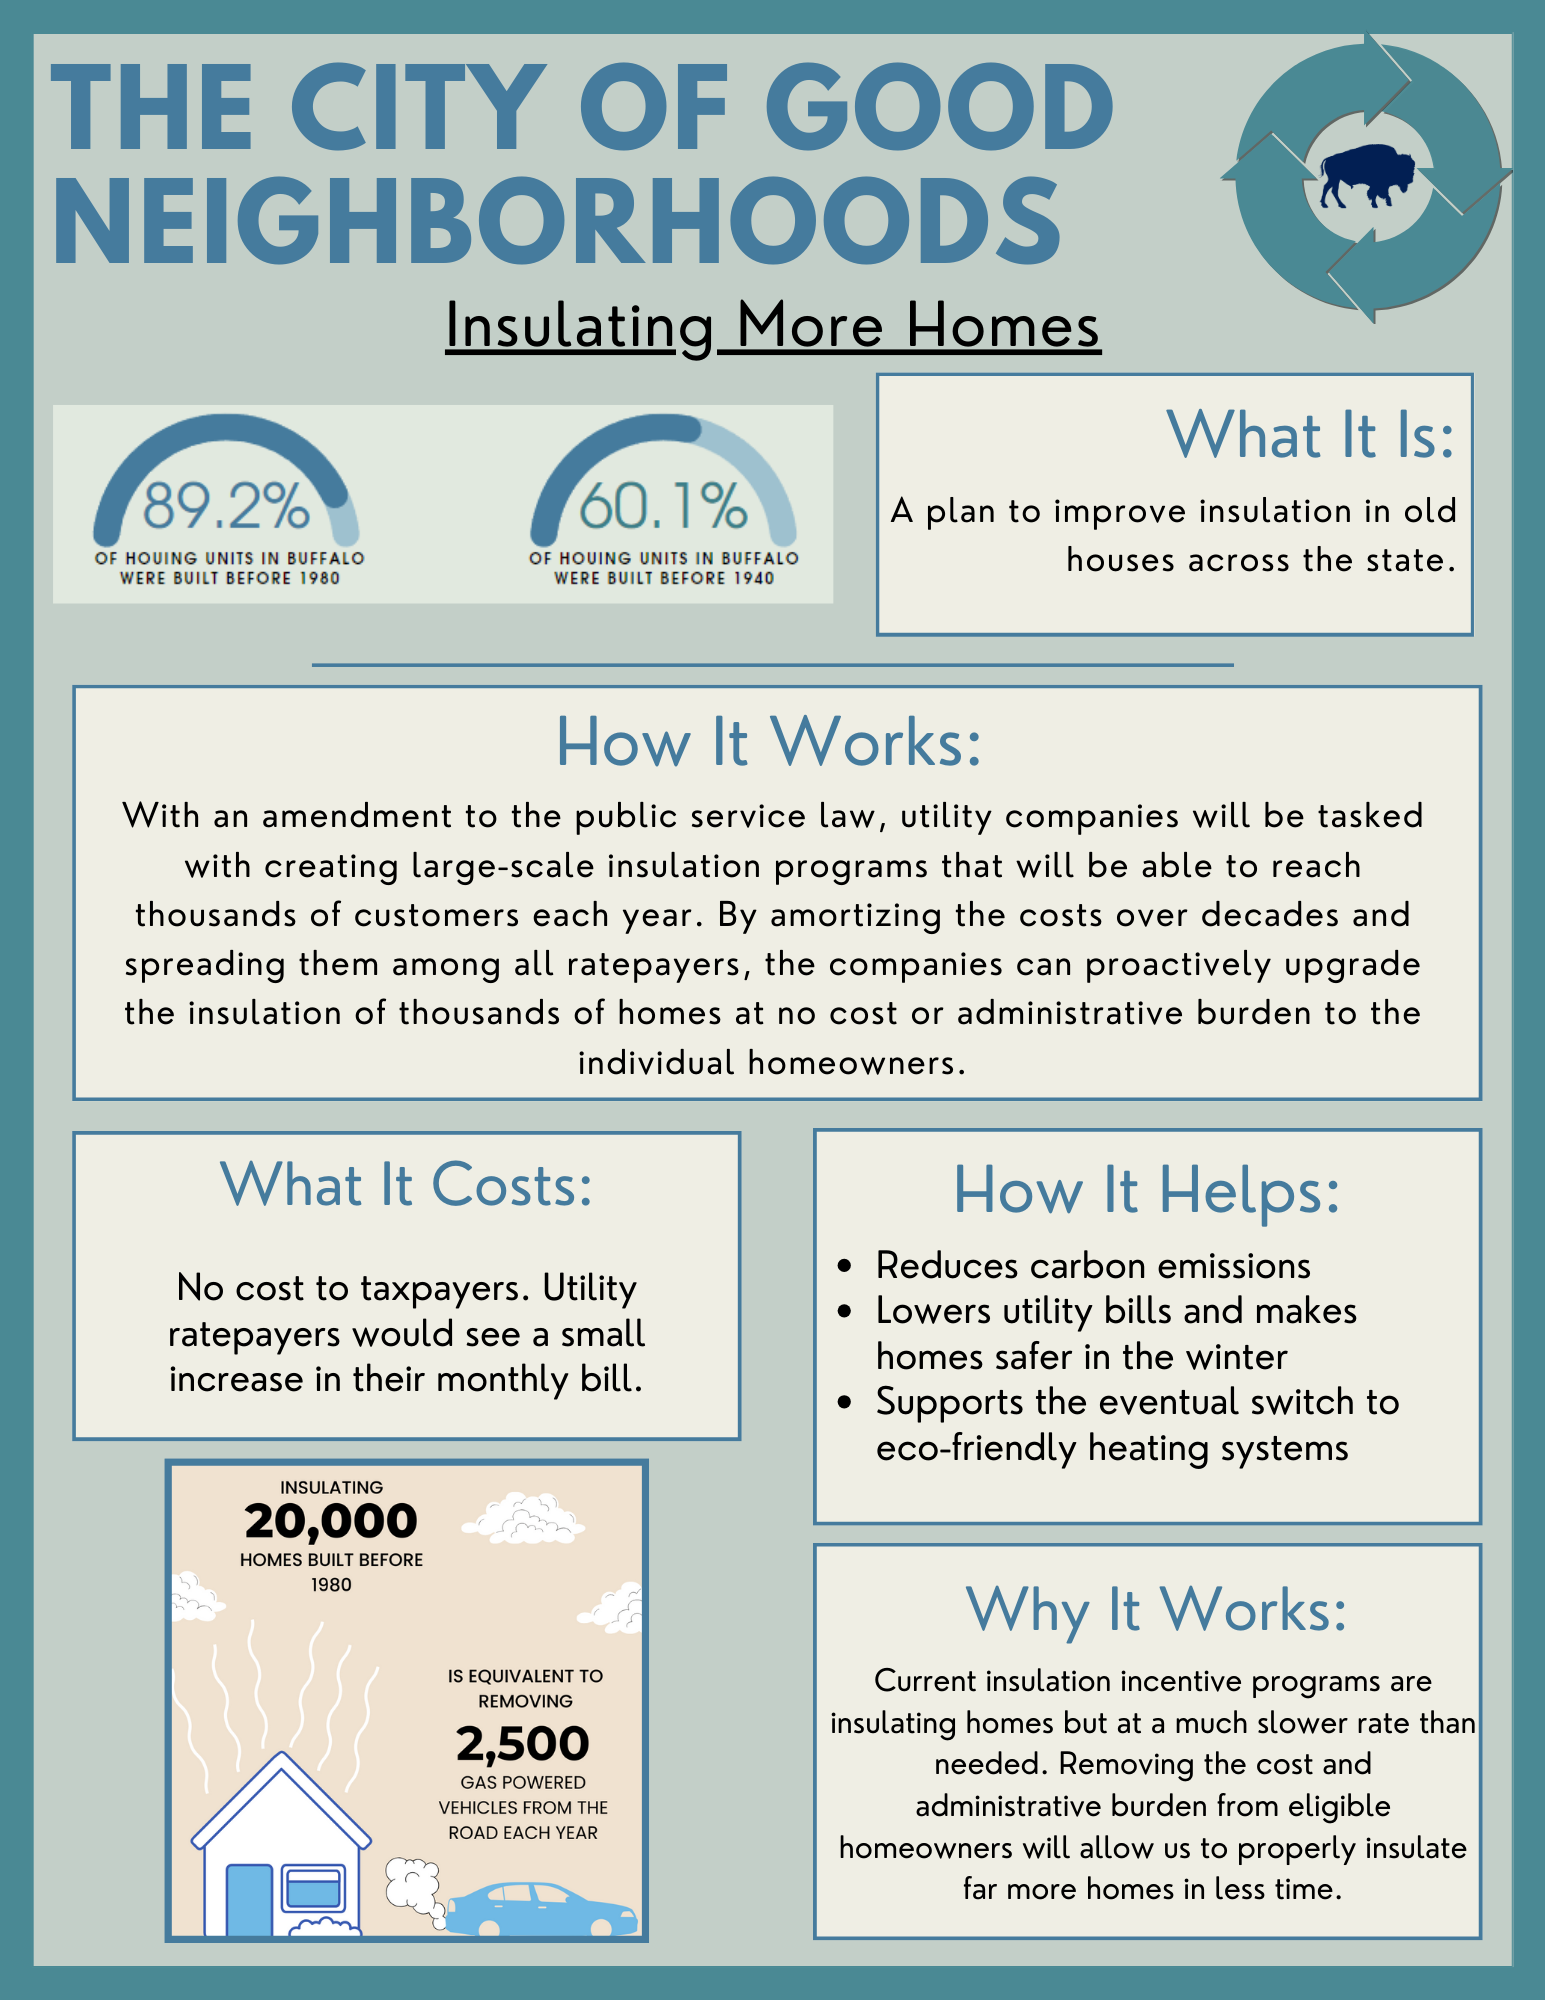 Insulating More Homes What It Is: A plan to improve insulation in old houses across the state.  How It Works: With an amendment to the public service law, utility companies will be tasked with creating large-scale insulation programs that will be able to reach thousands of customers each year. By amortizing the costs over decades and spreading them among all ratepayers, the companies can proactively upgrade the insulation of thousands of homes at no cost or administrative burden to the individual homeowners.  How It Helps: ● Reduces carbon emissions ● Lowers utility bills and makes homes safer in the winter ● Supports the eventual switch to eco-friendly heating systems  What It Costs: No cost to taxpayers. Utility ratepayers would see a small increase in their monthly bill.  Why It Works: Current insulation incentive programs are insulating homes but at a much slower rate than needed. Removing the cost and administrative burden from eligible homeowners will allow us to properly insulate far more homes in less time.